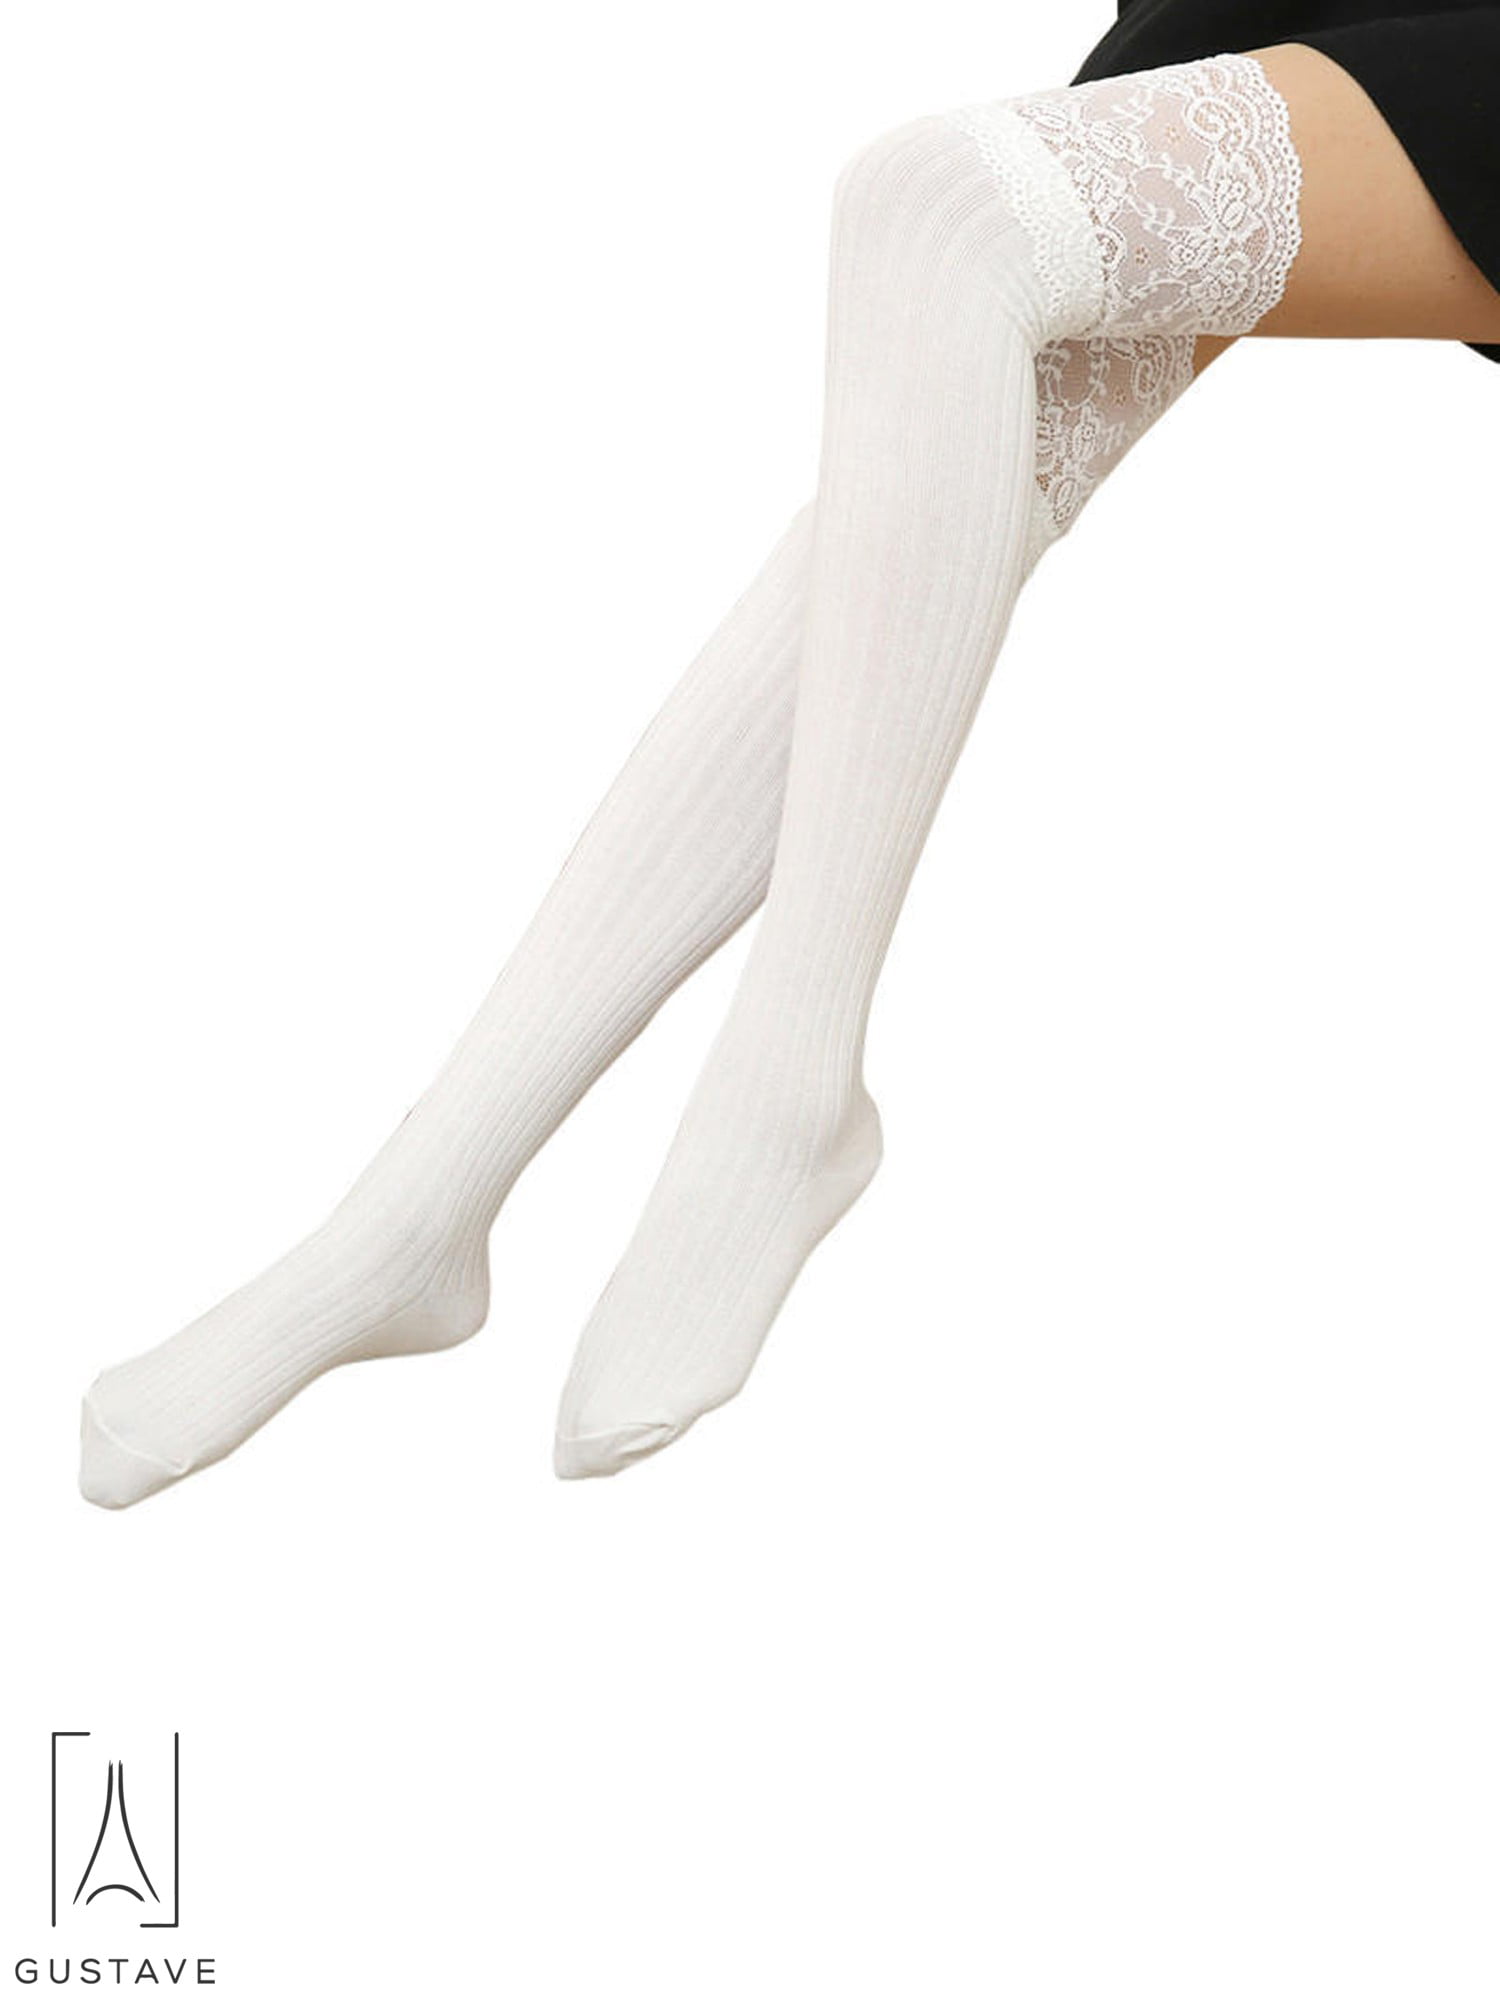 Details about   HB Women Knitted Solid Color Knee-High Socks Thigh Stockings Leg Warmers Wide 